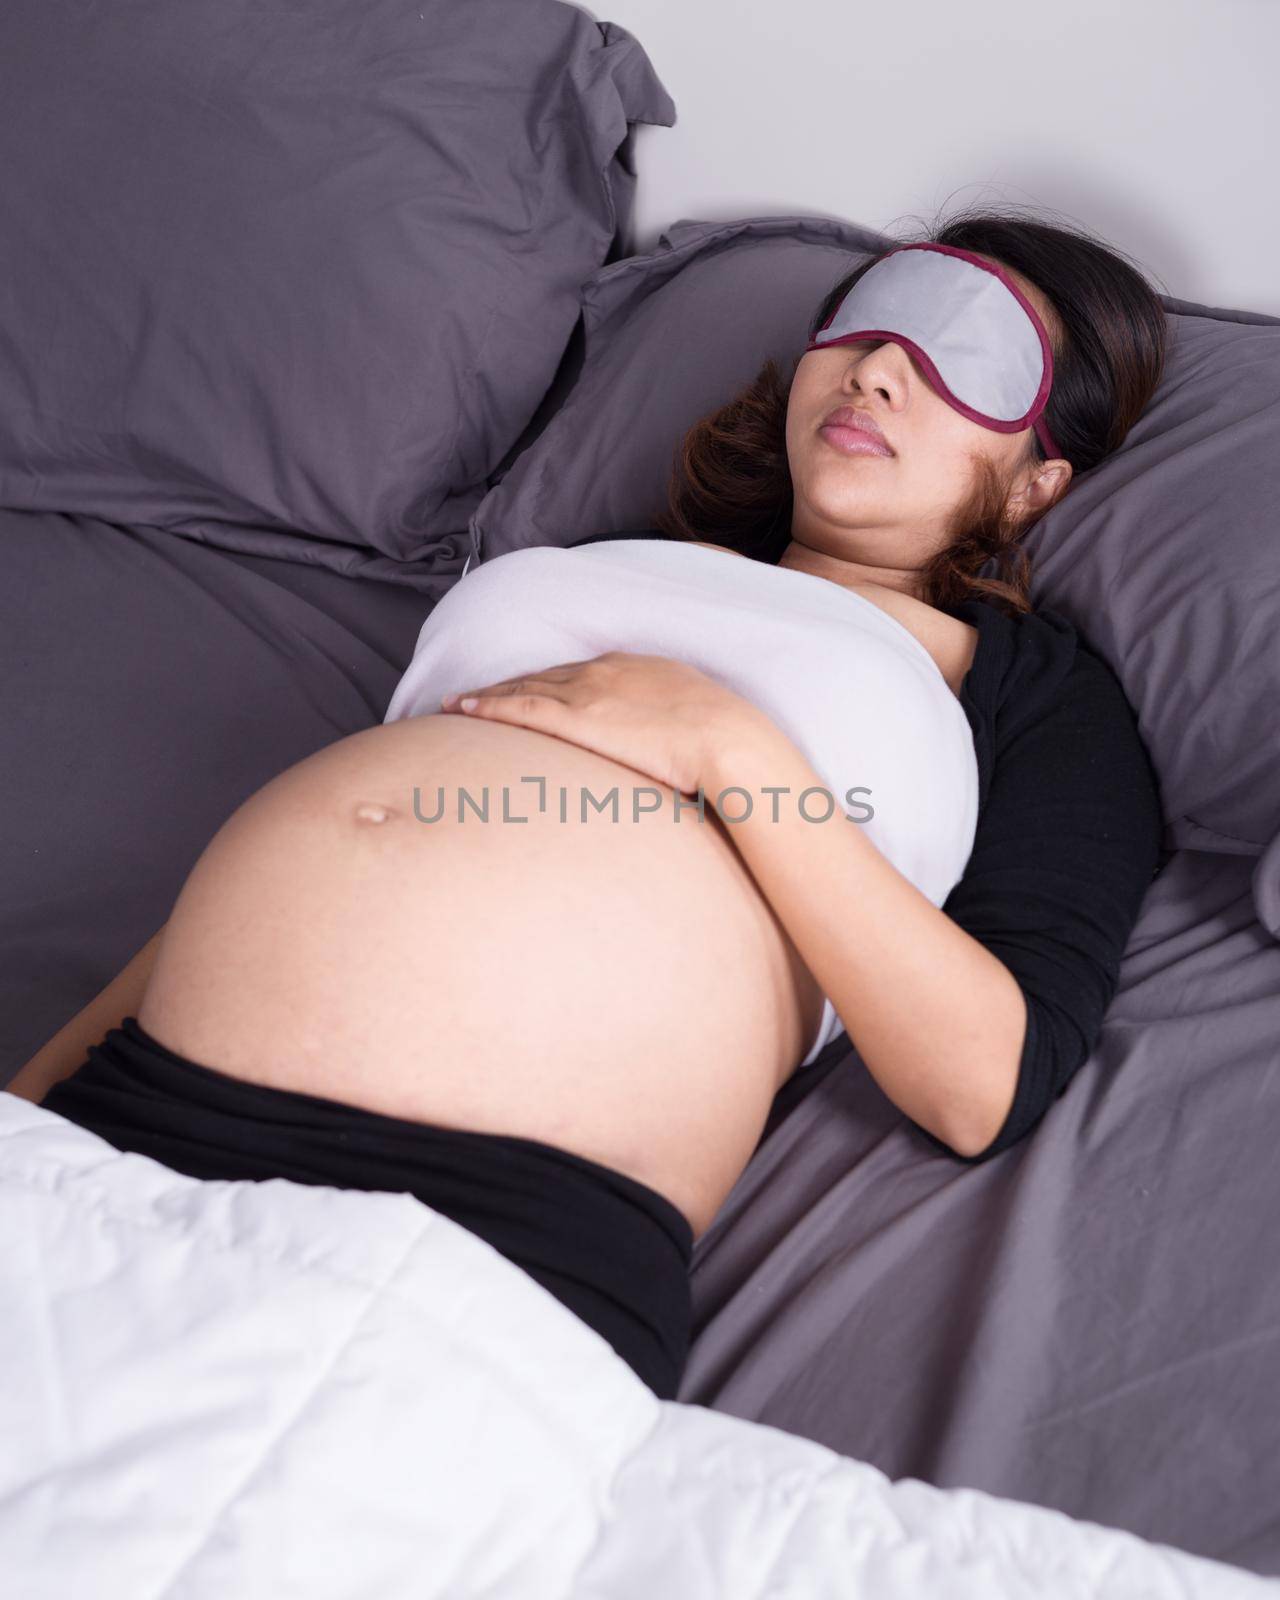 pregnant woman sleeping on bed in the bedroom by geargodz